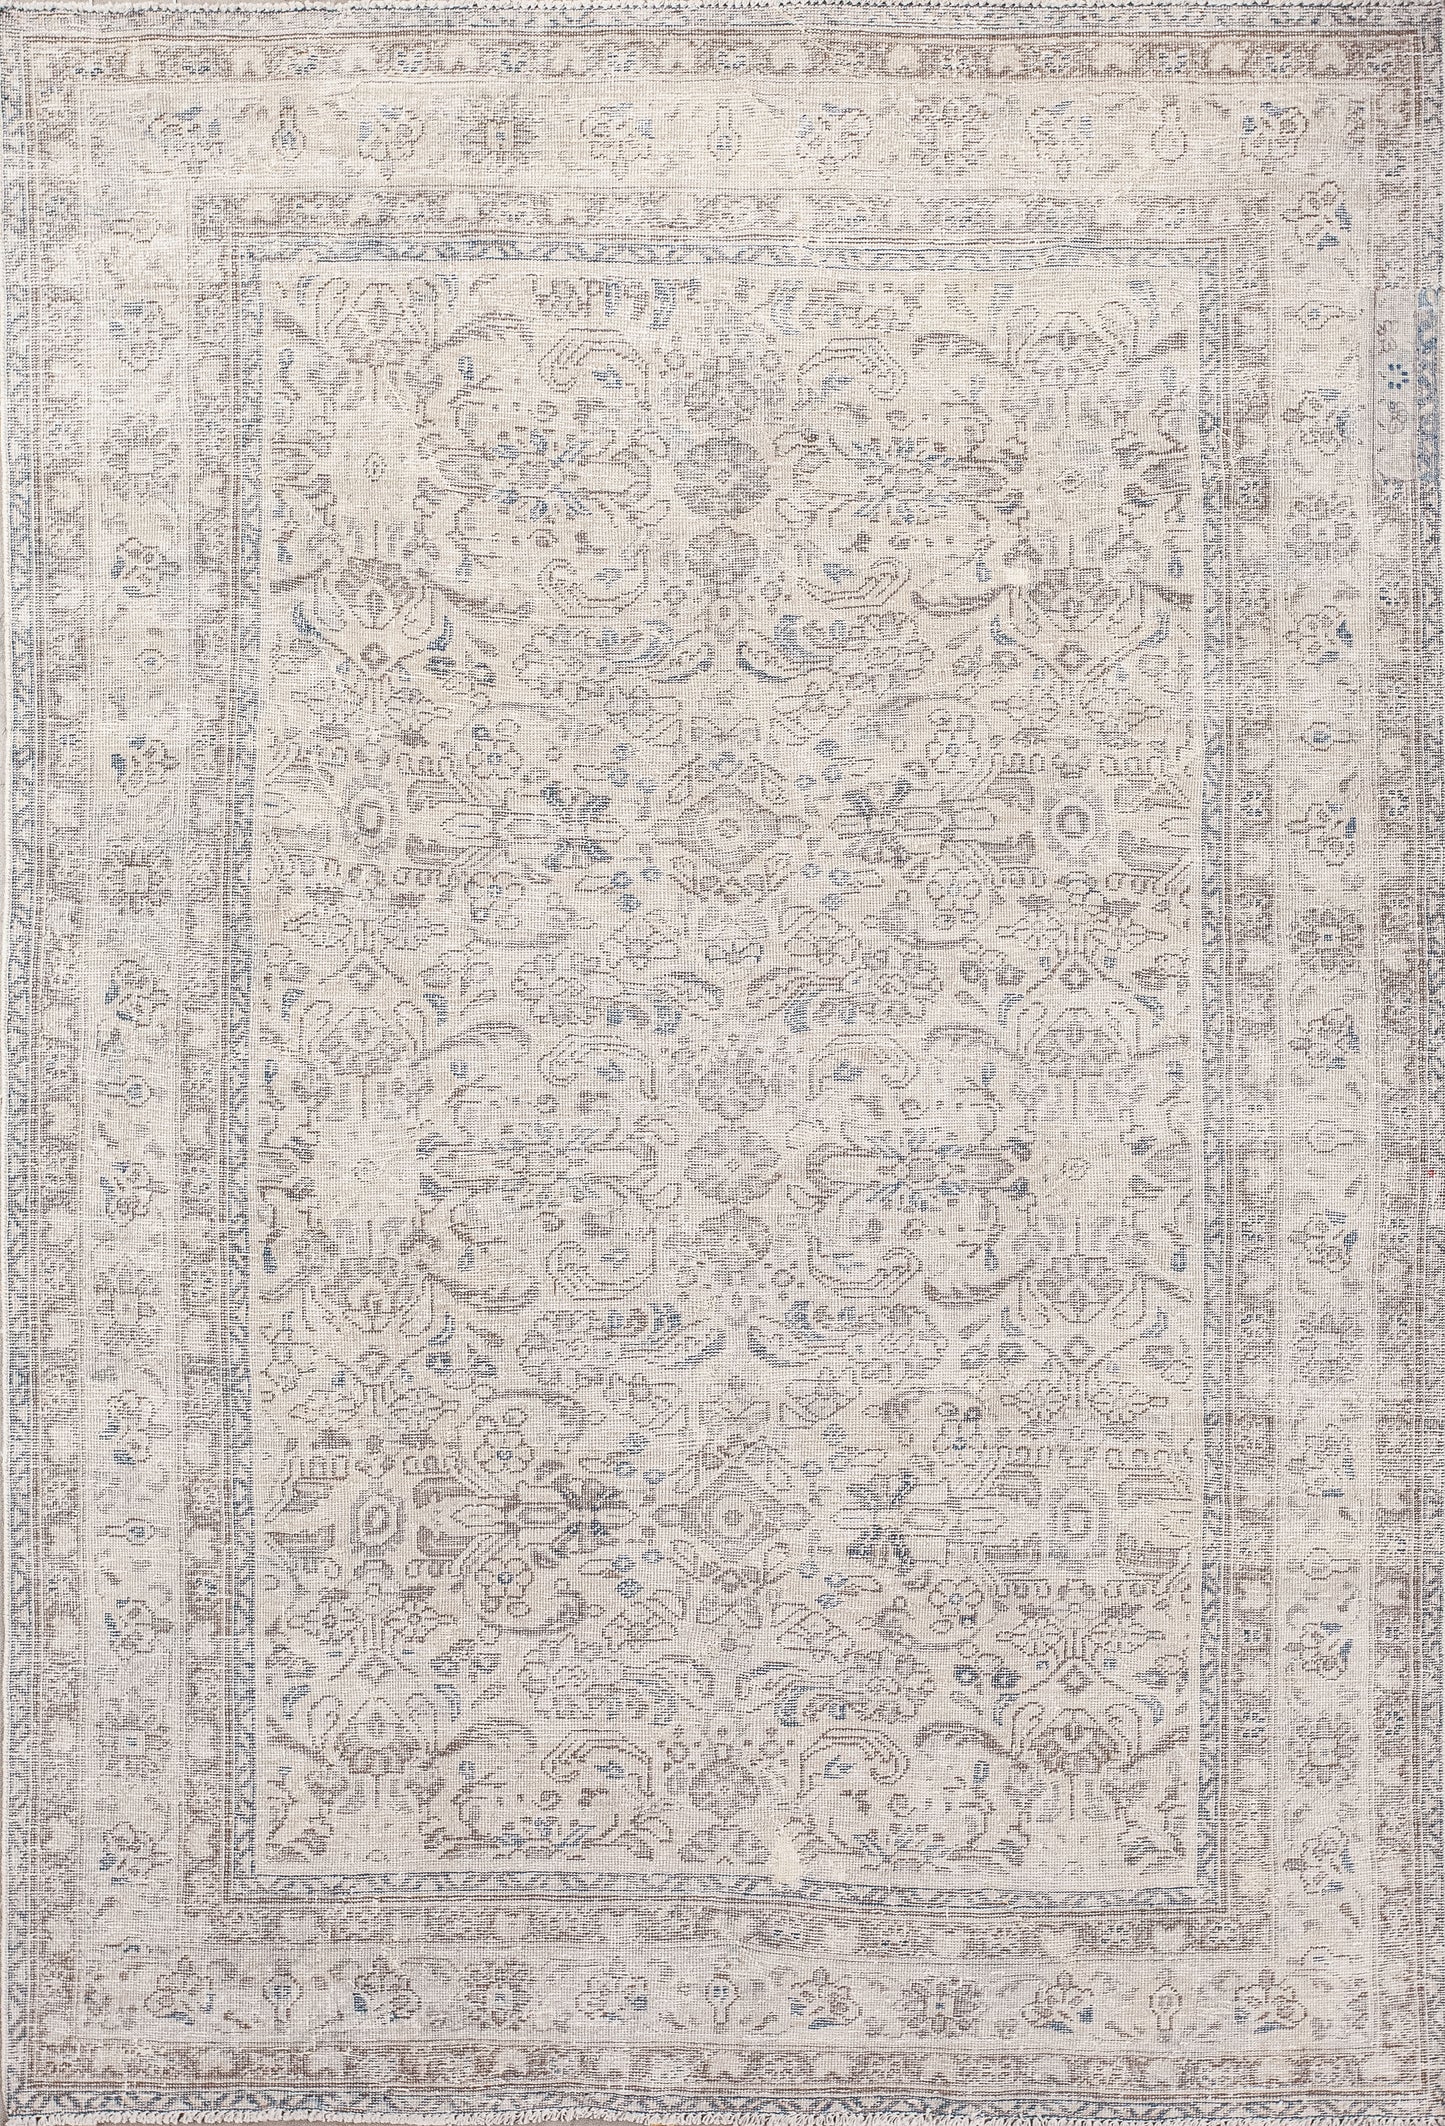 Vintage rug was woven with beige background and a floral pattern. Also, this elegant carpet comes with leaves and geometrical figures in blue and light brown.